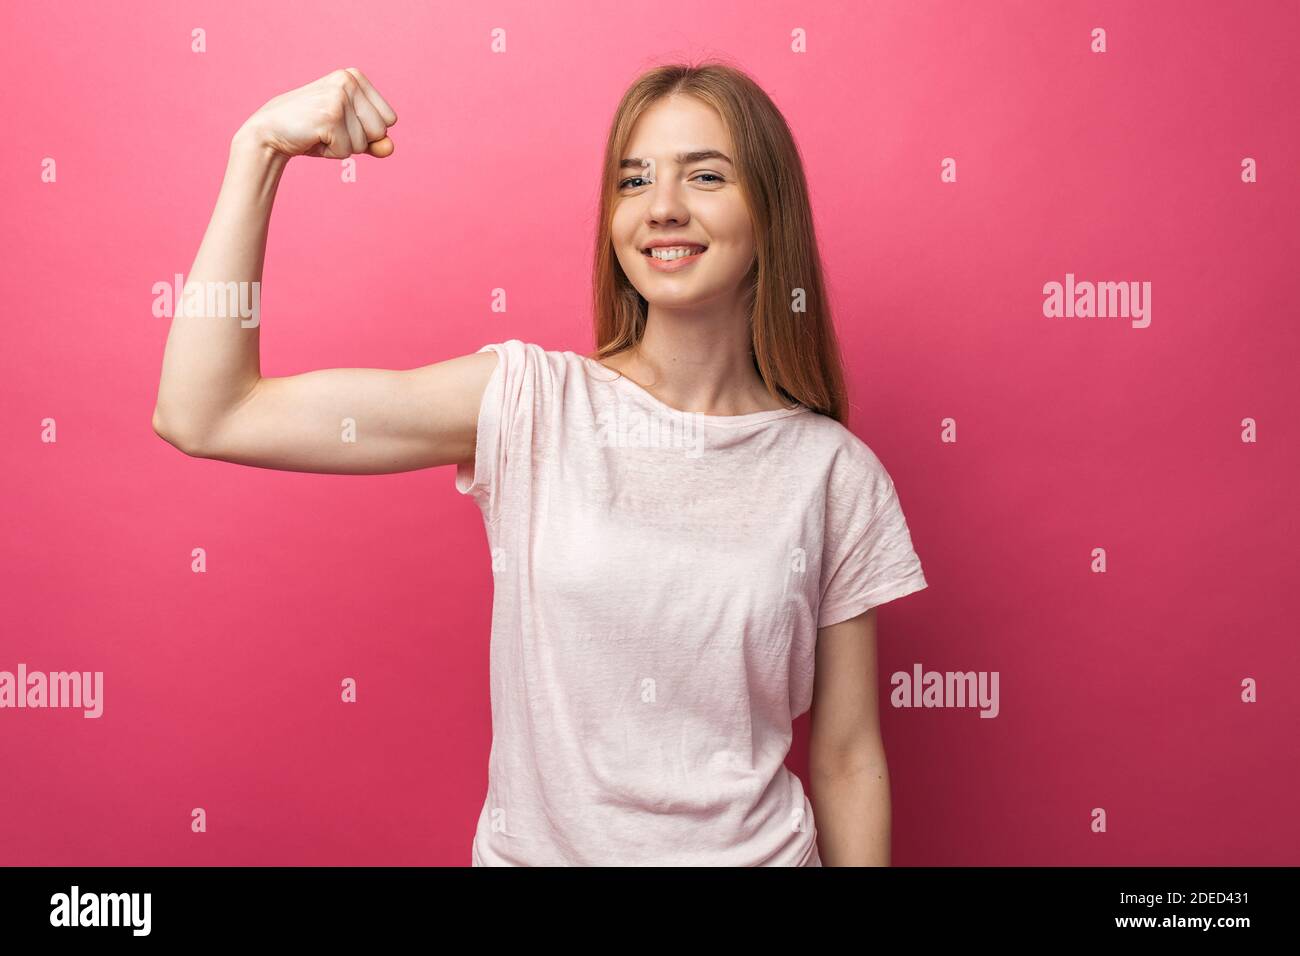 Portrait of cheerful young girl bending biceps isolated on pink background, Stock Photo